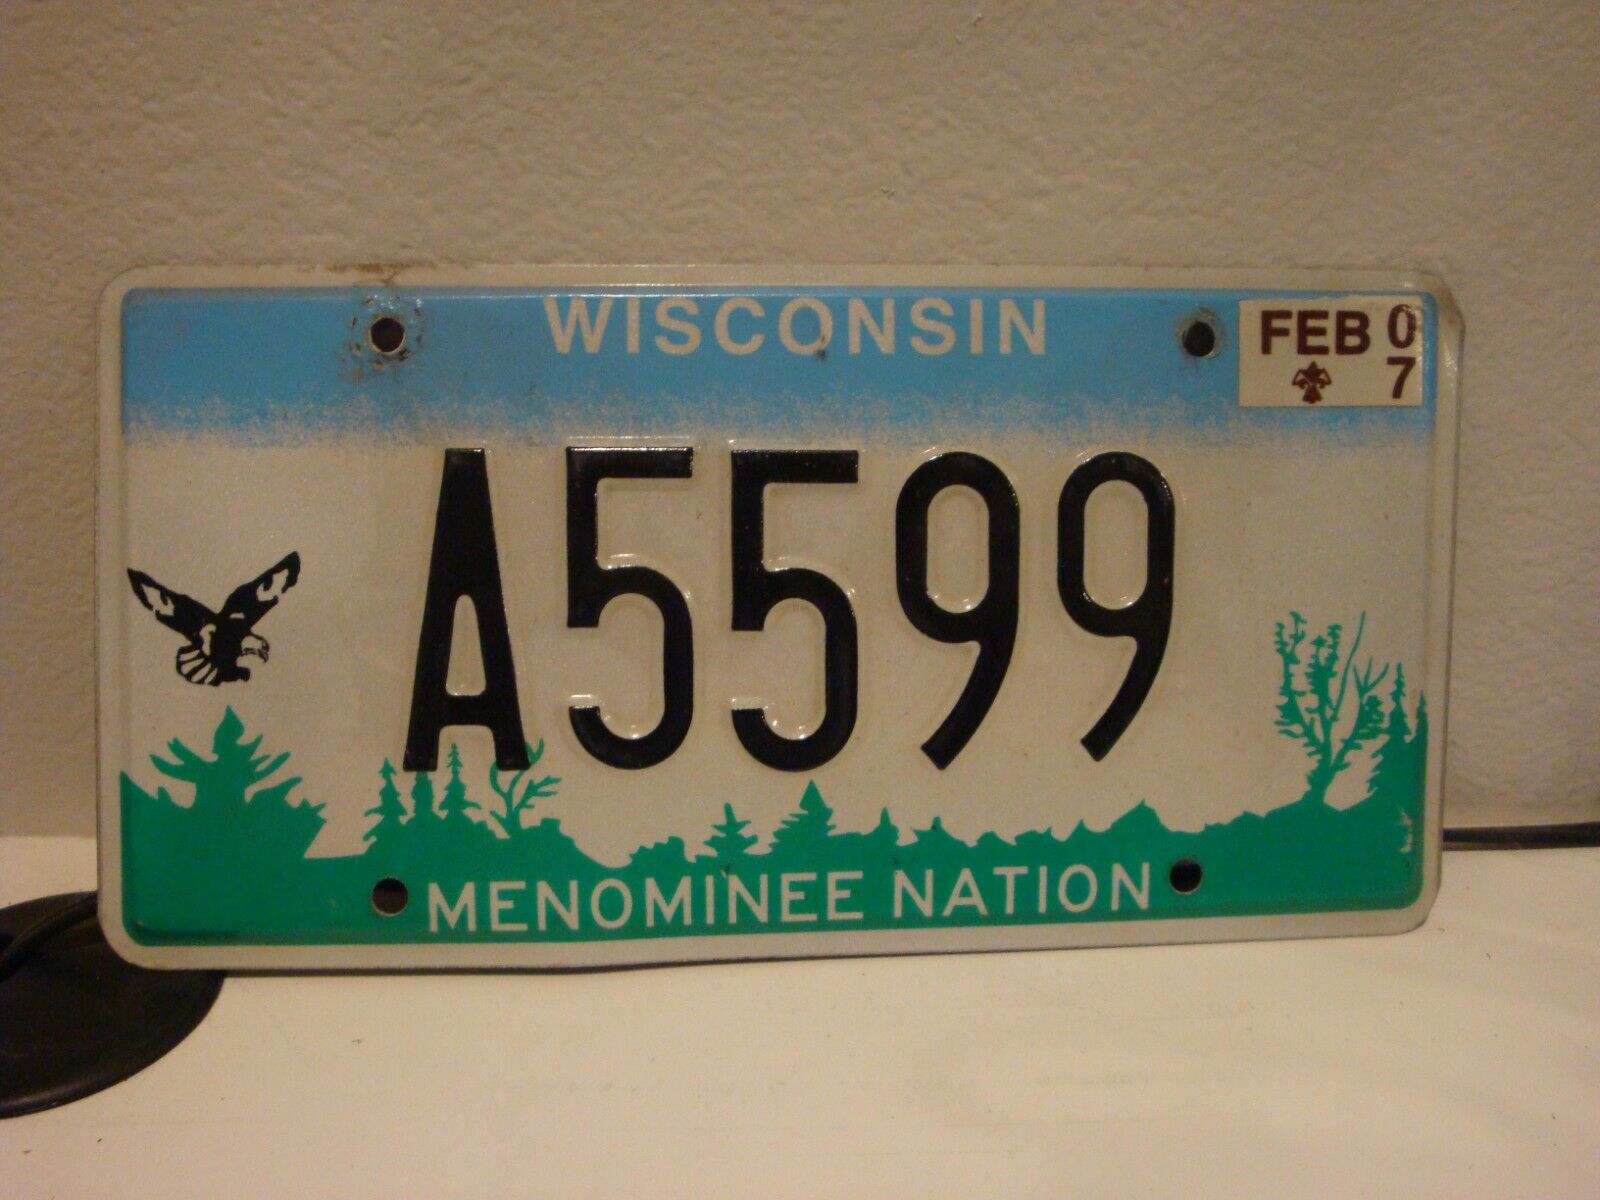 Wisconsin Menominee Nation Indian Tribe License Plate  # A5599